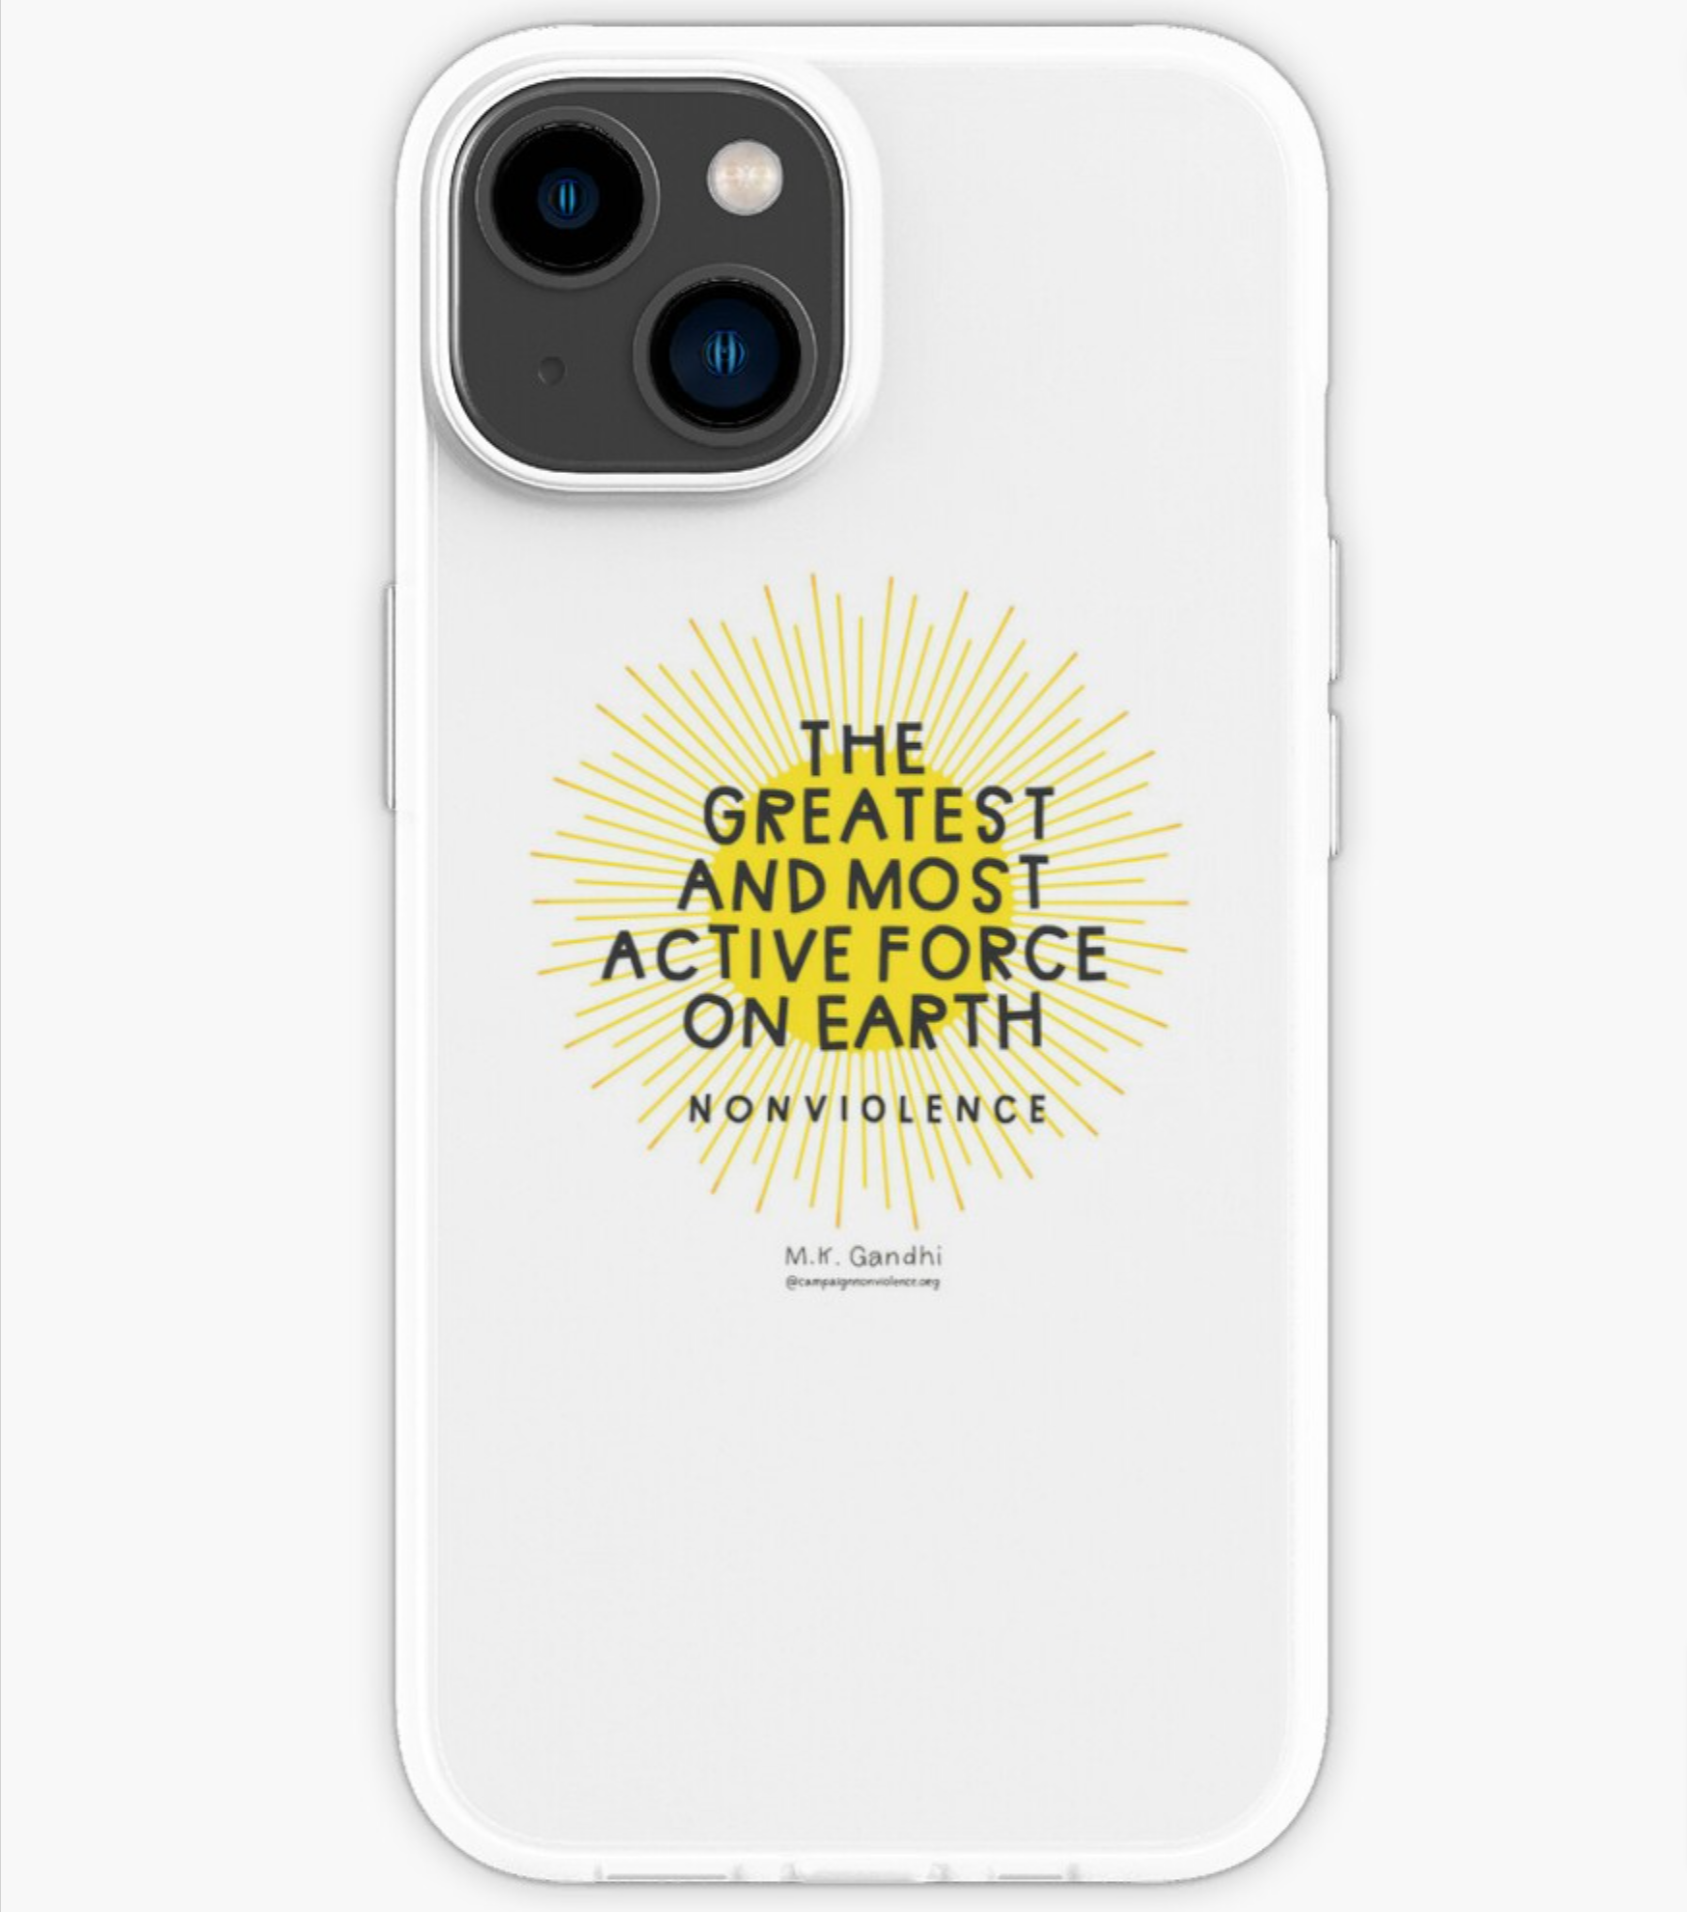 NONVIOLENCE: The Greatest Most Active Force on Earth - Gandhi iPhone Case